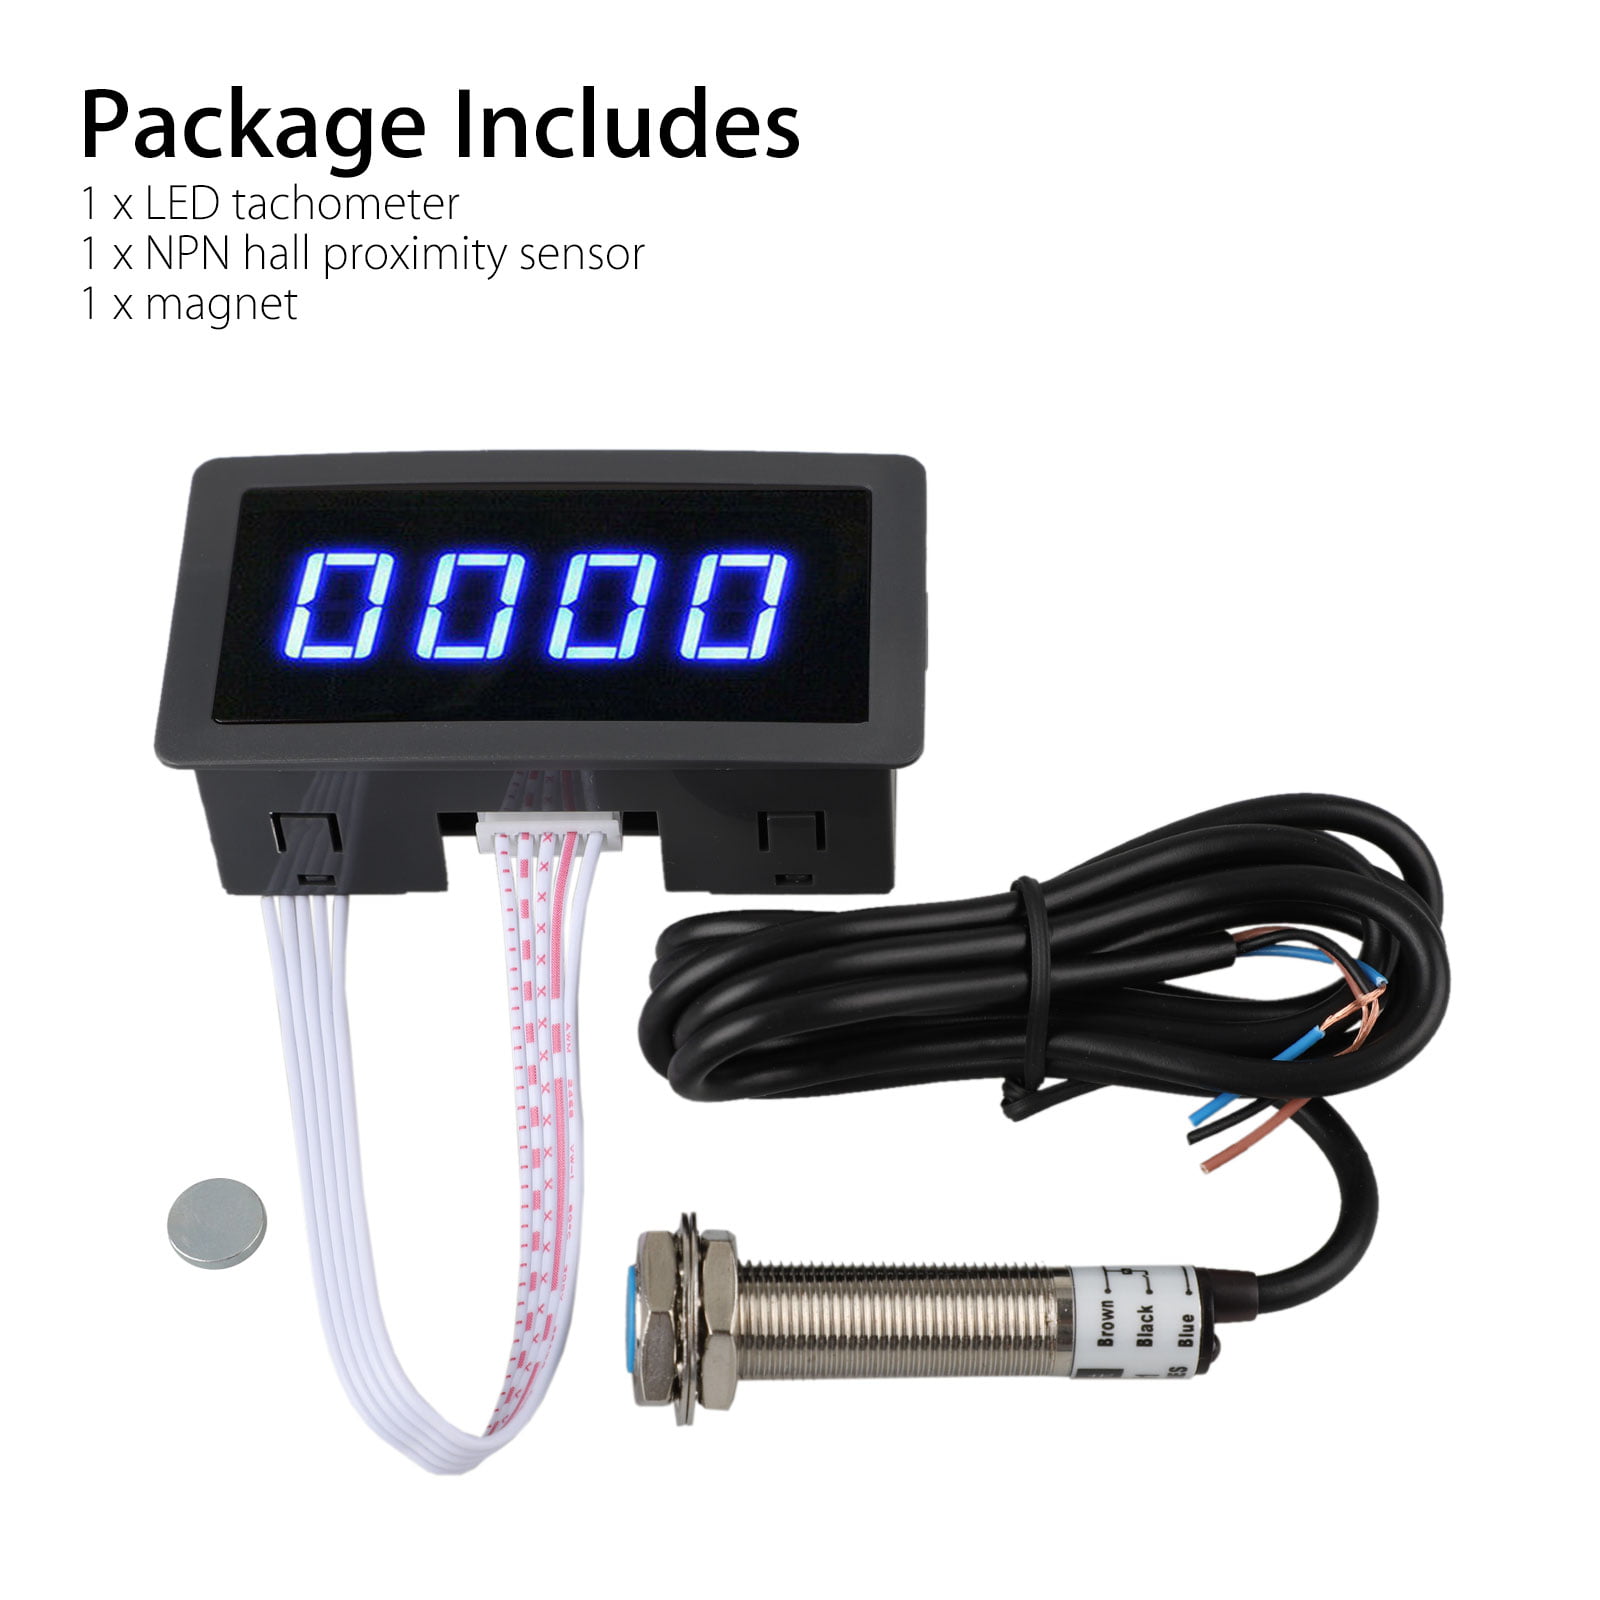 New 4 Digital LED Tachometer RPM Speed Meter with Hall Sensor NPN Tool Easy Use 